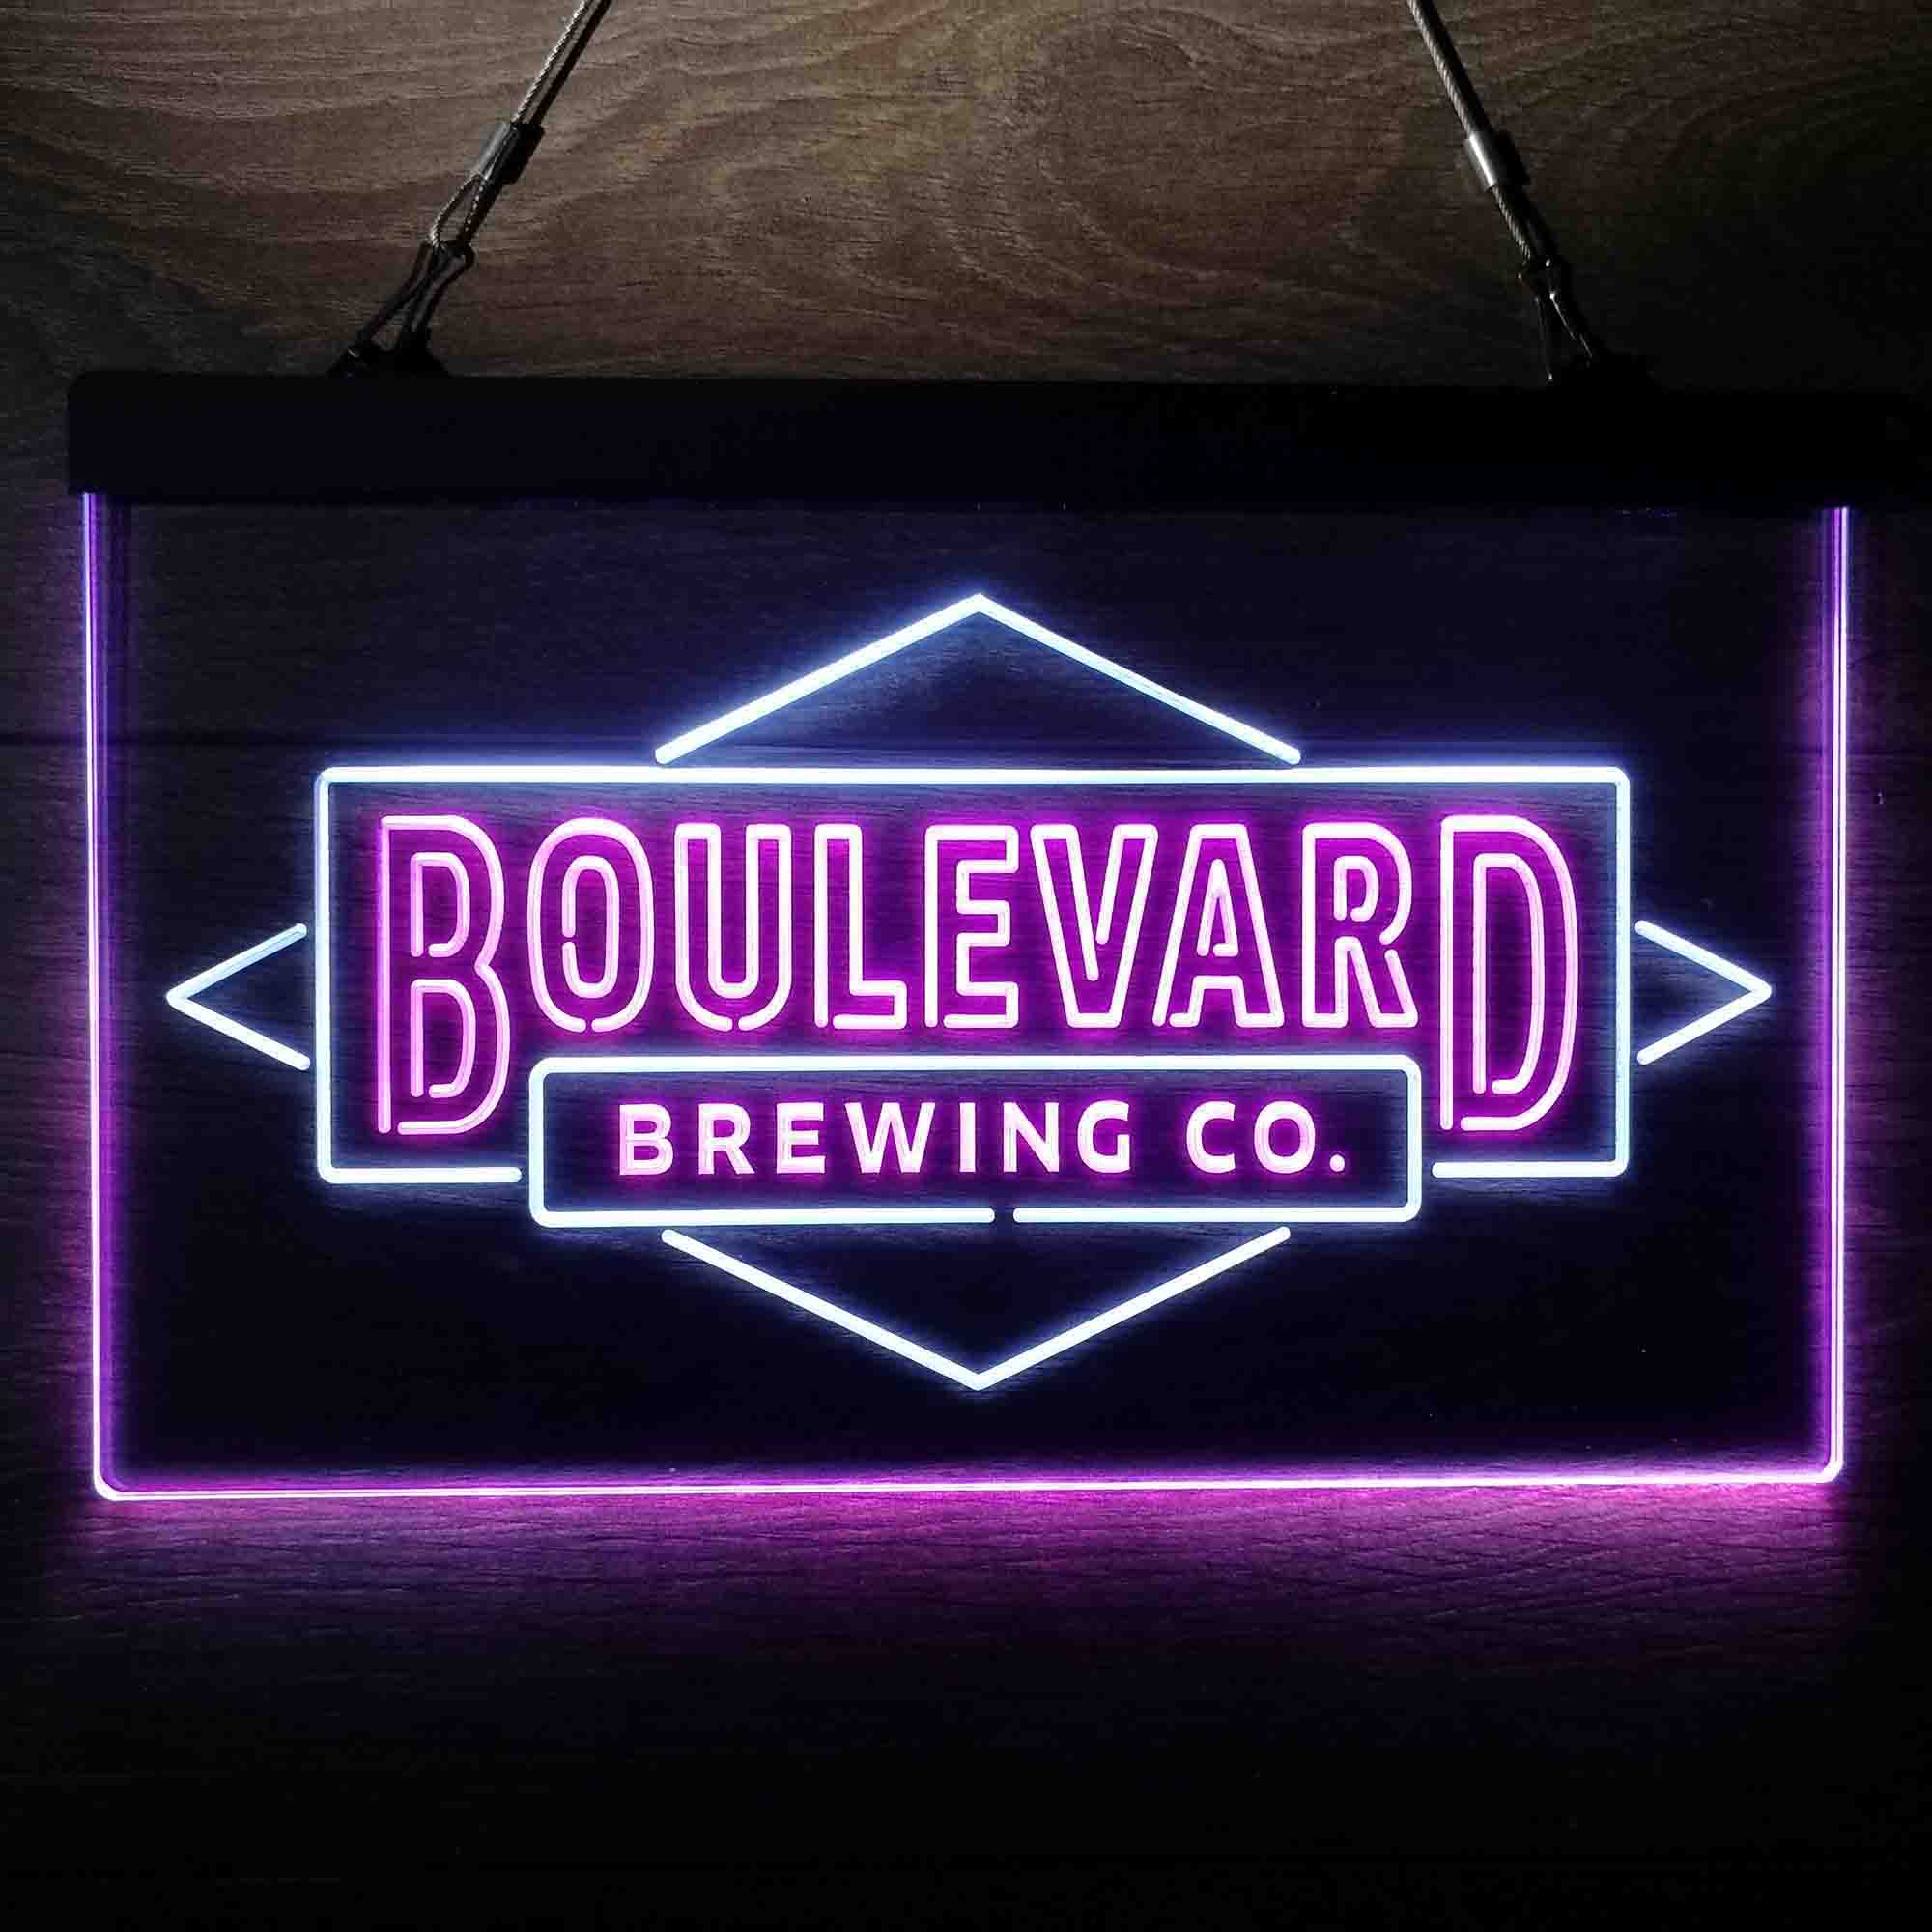 Boulevard Brewing Co. Neon-Like LED Sign